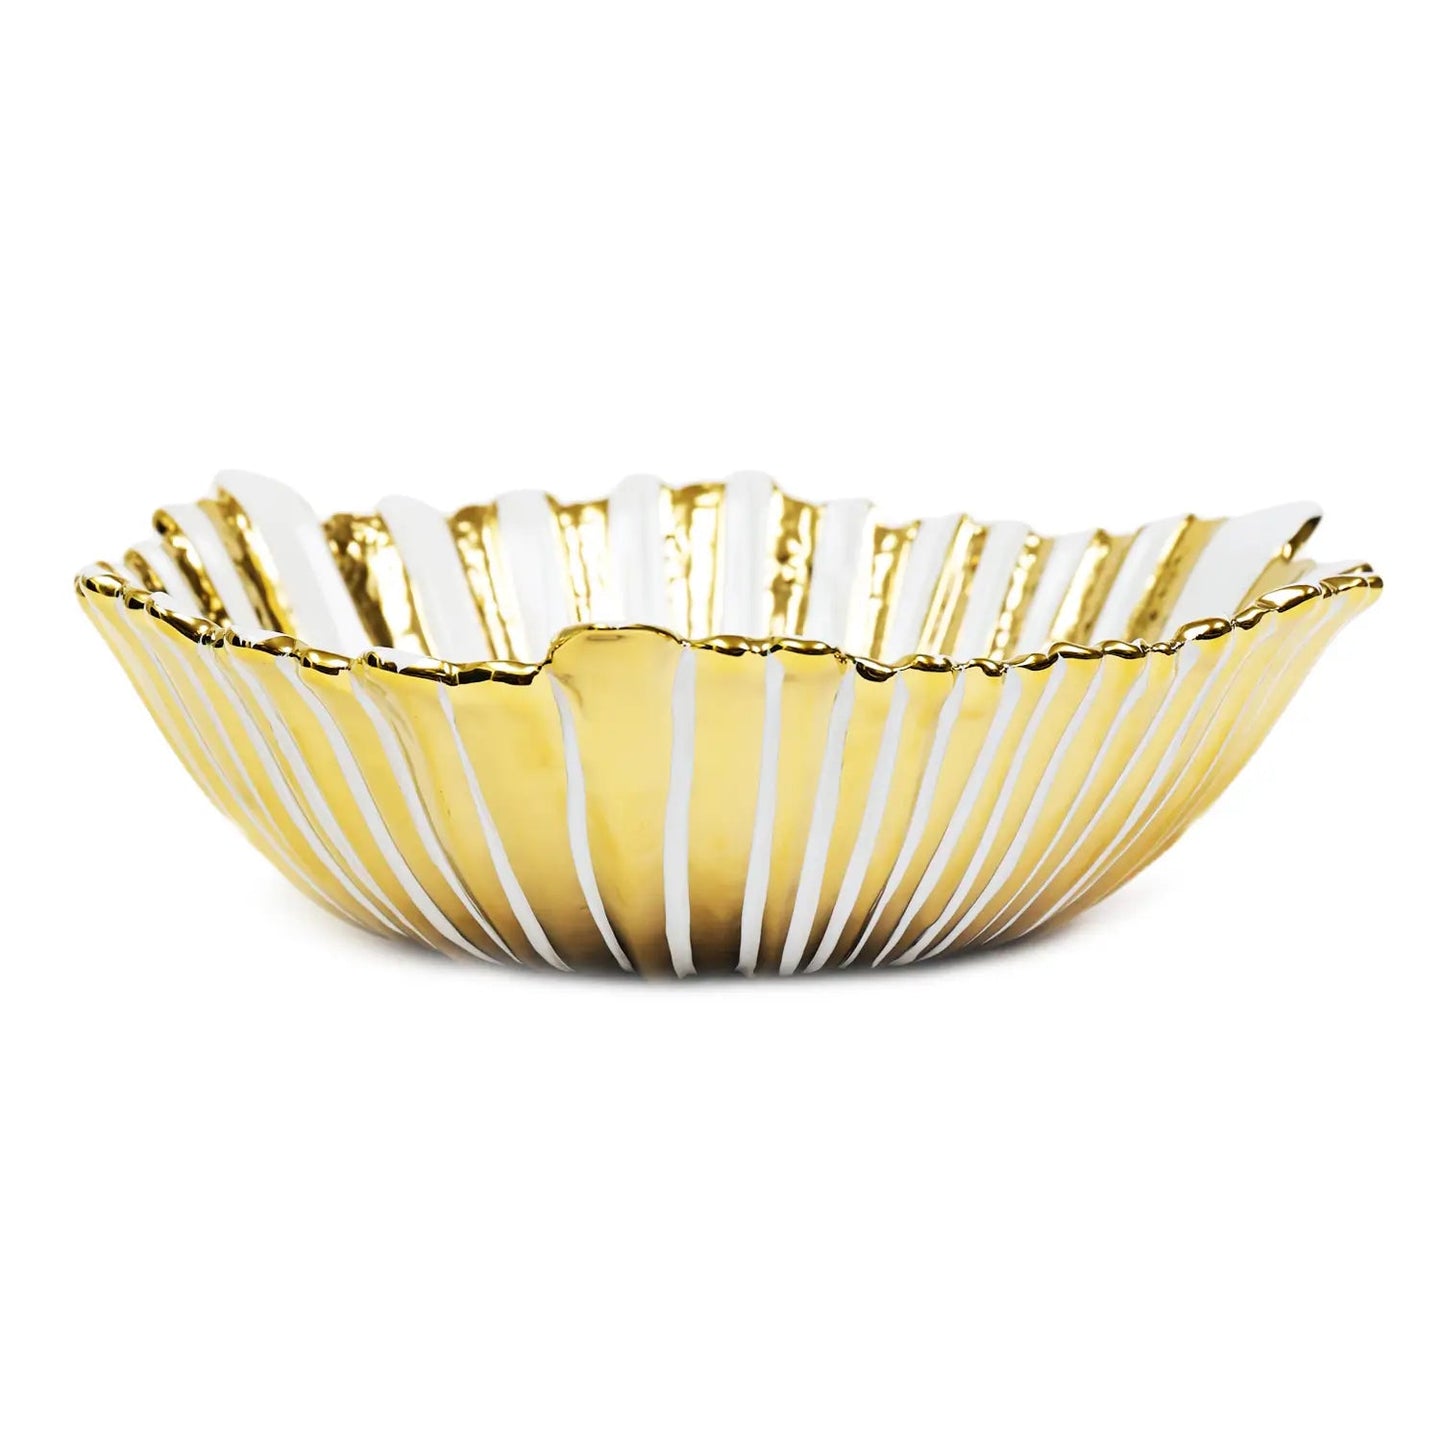 White and Gold Striped Flower Shaped Salad Bowl Decorative Bowls High Class Touch - Home Decor 